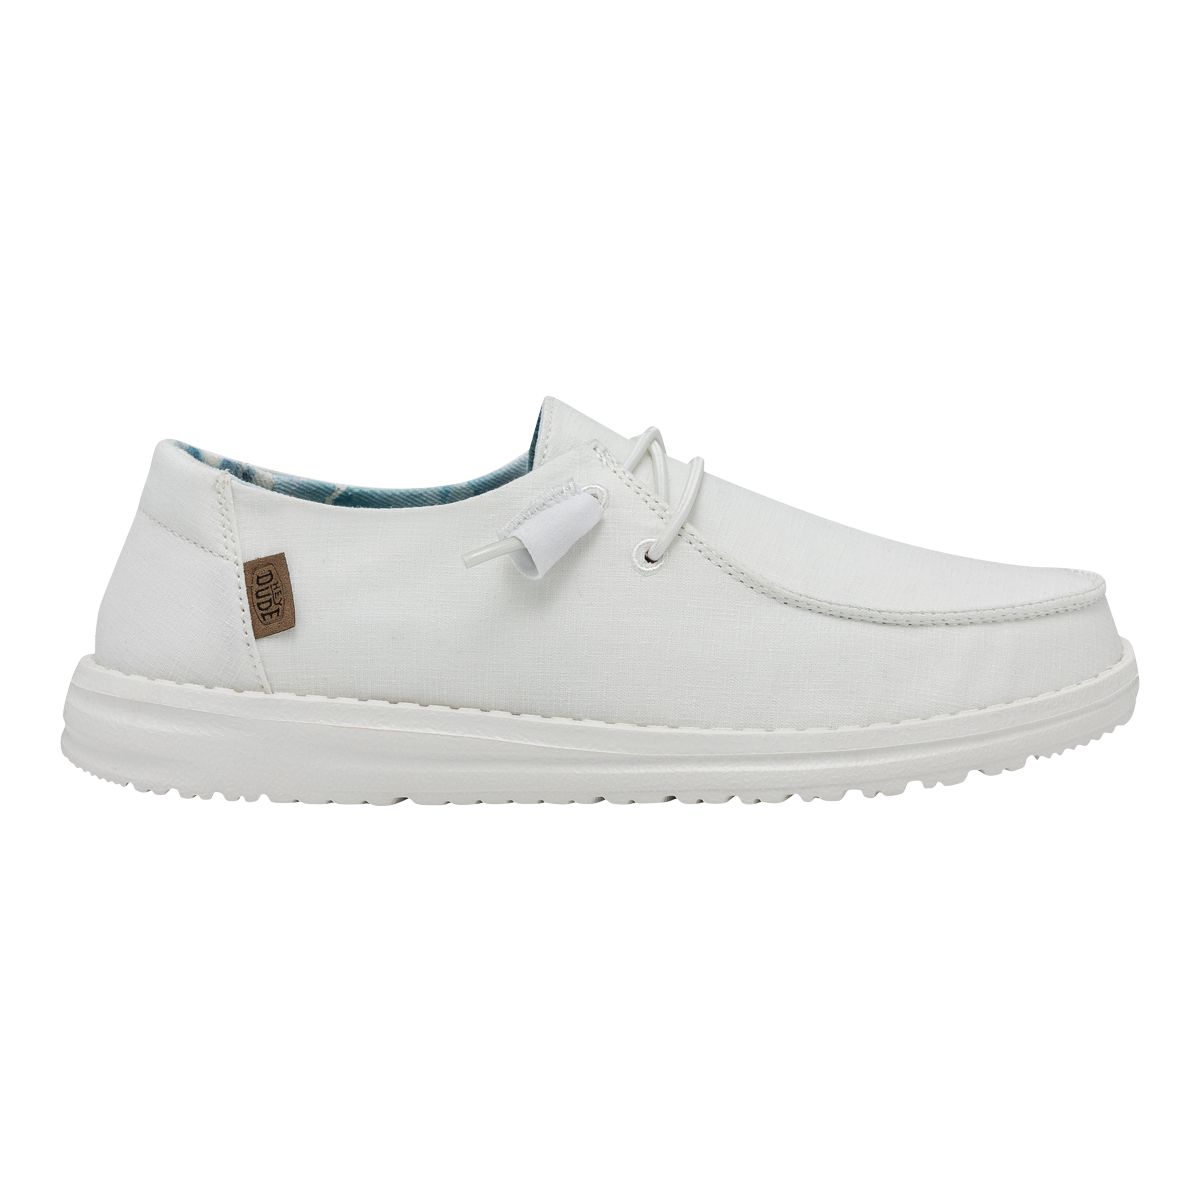 Image of Heydude Women's Wendy Casual Shoes